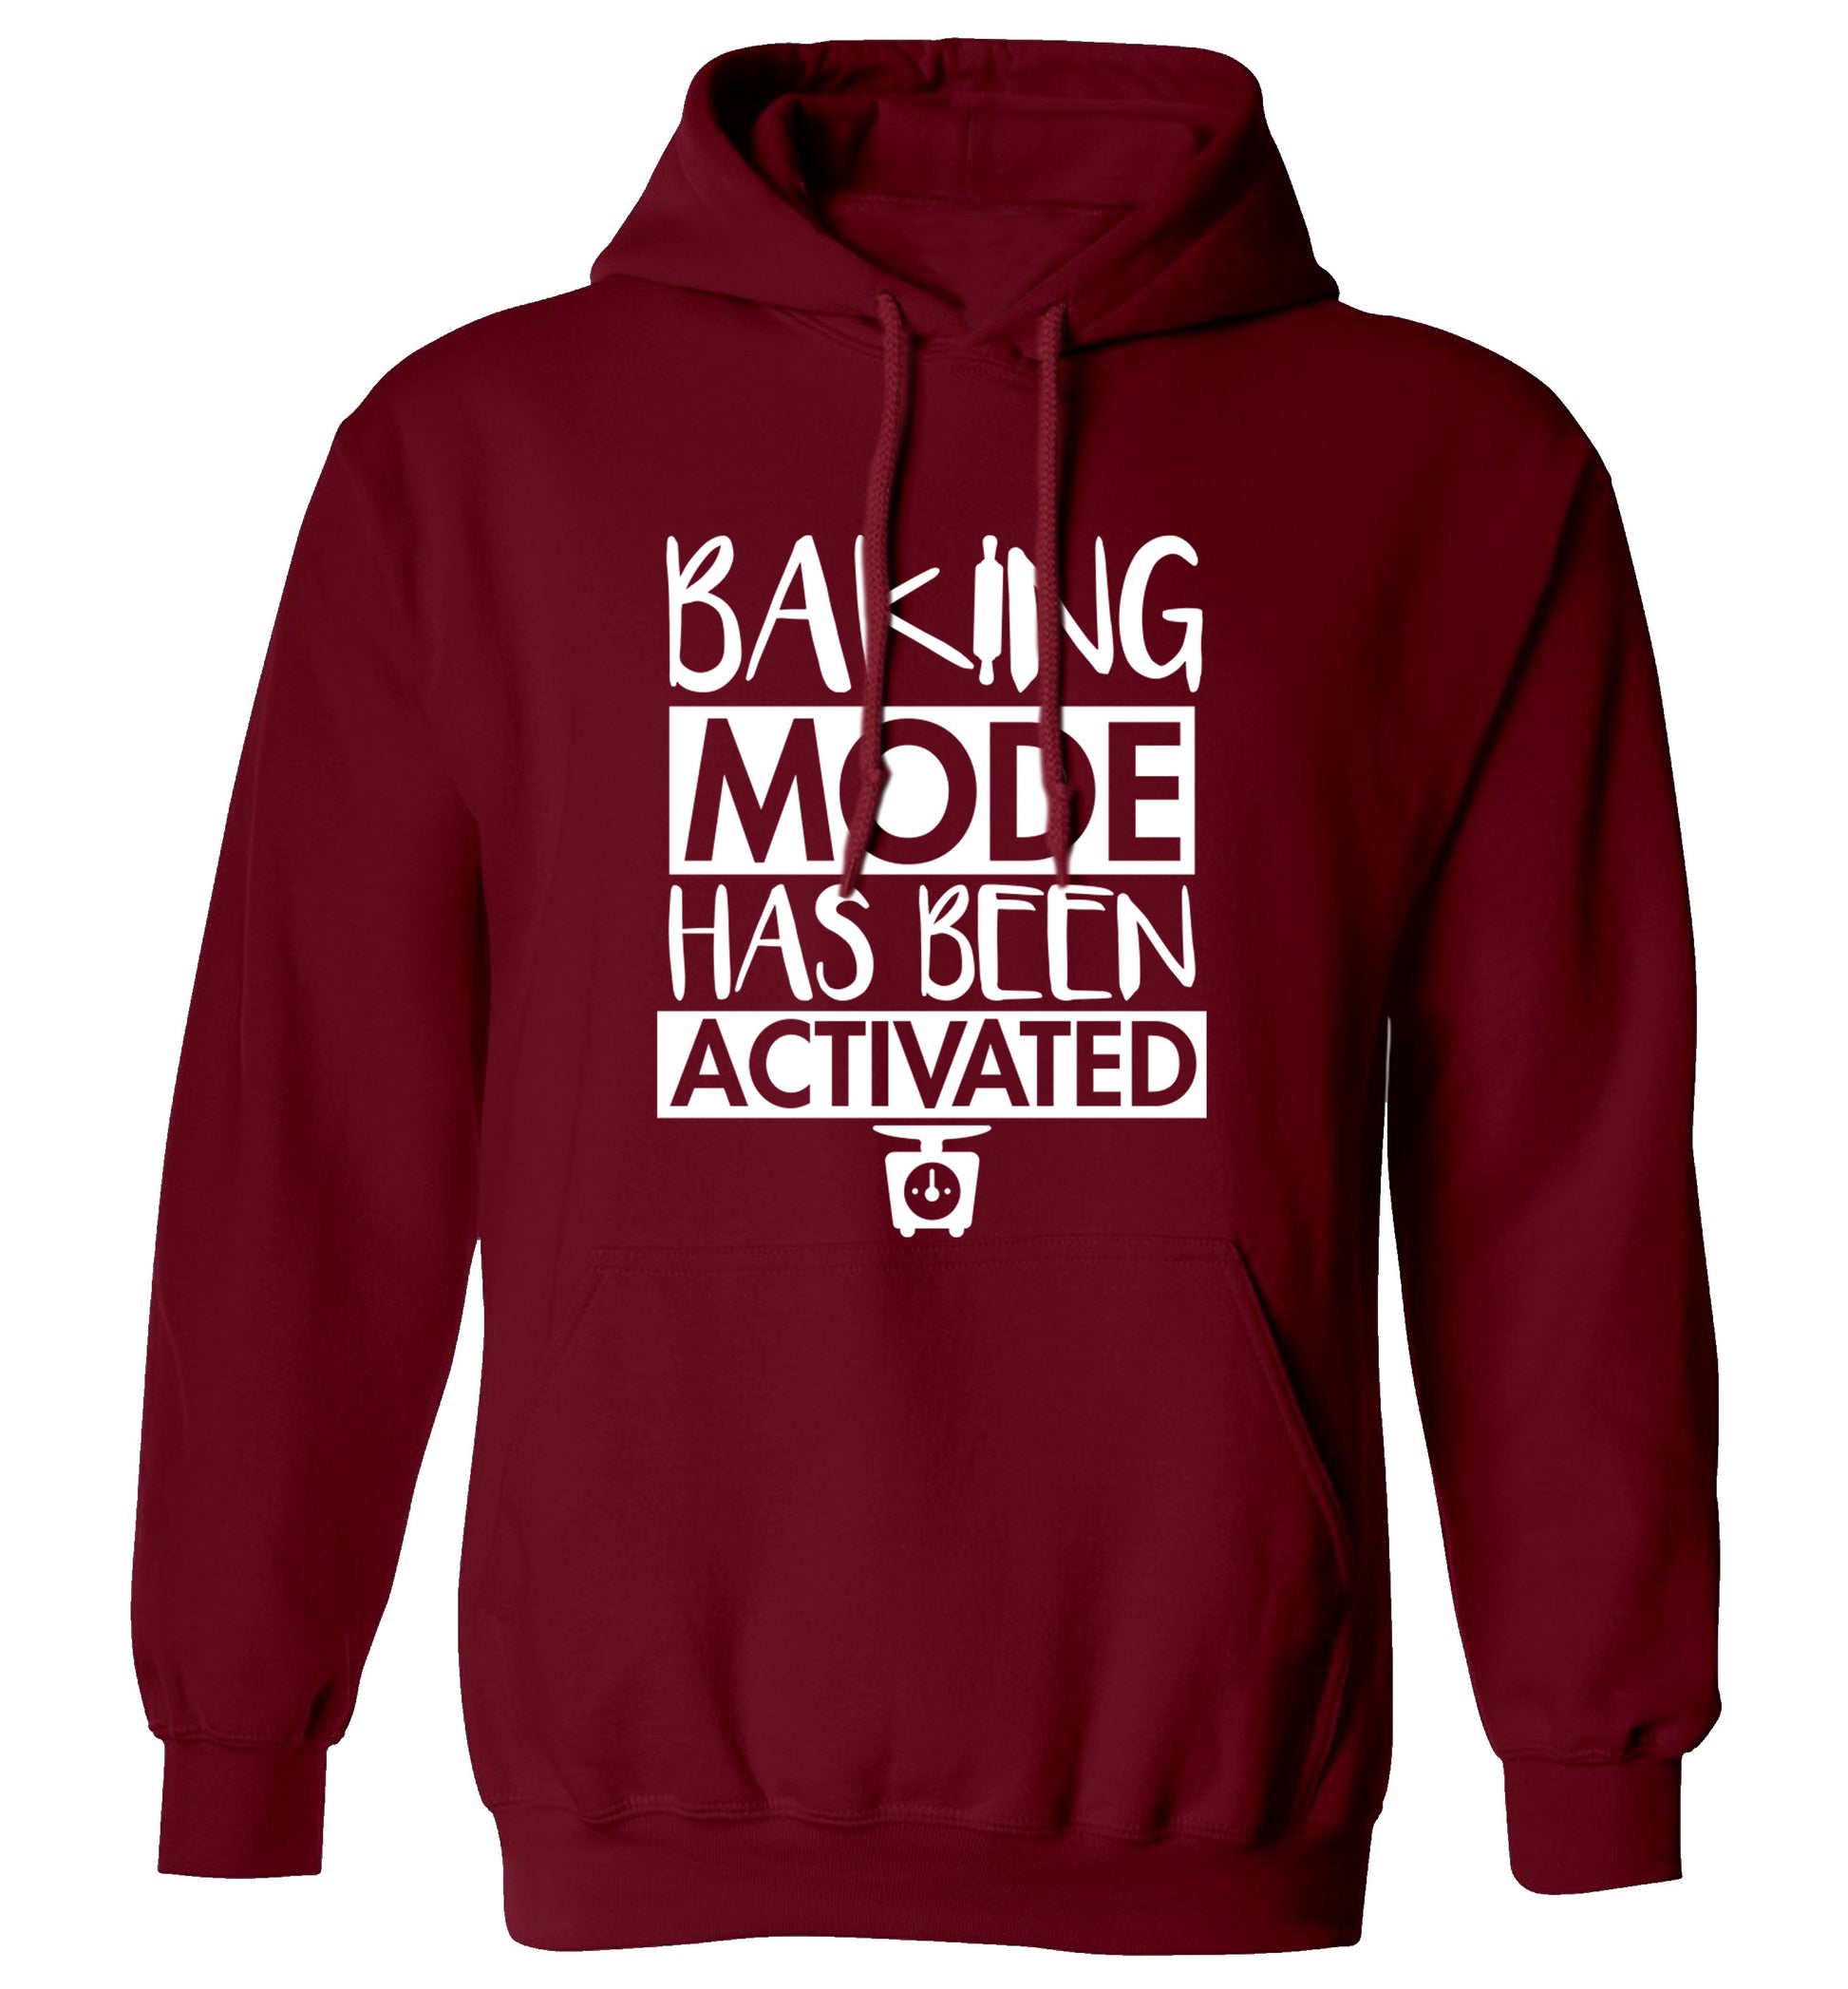 Baking mode has been activated adults unisex maroon hoodie 2XL